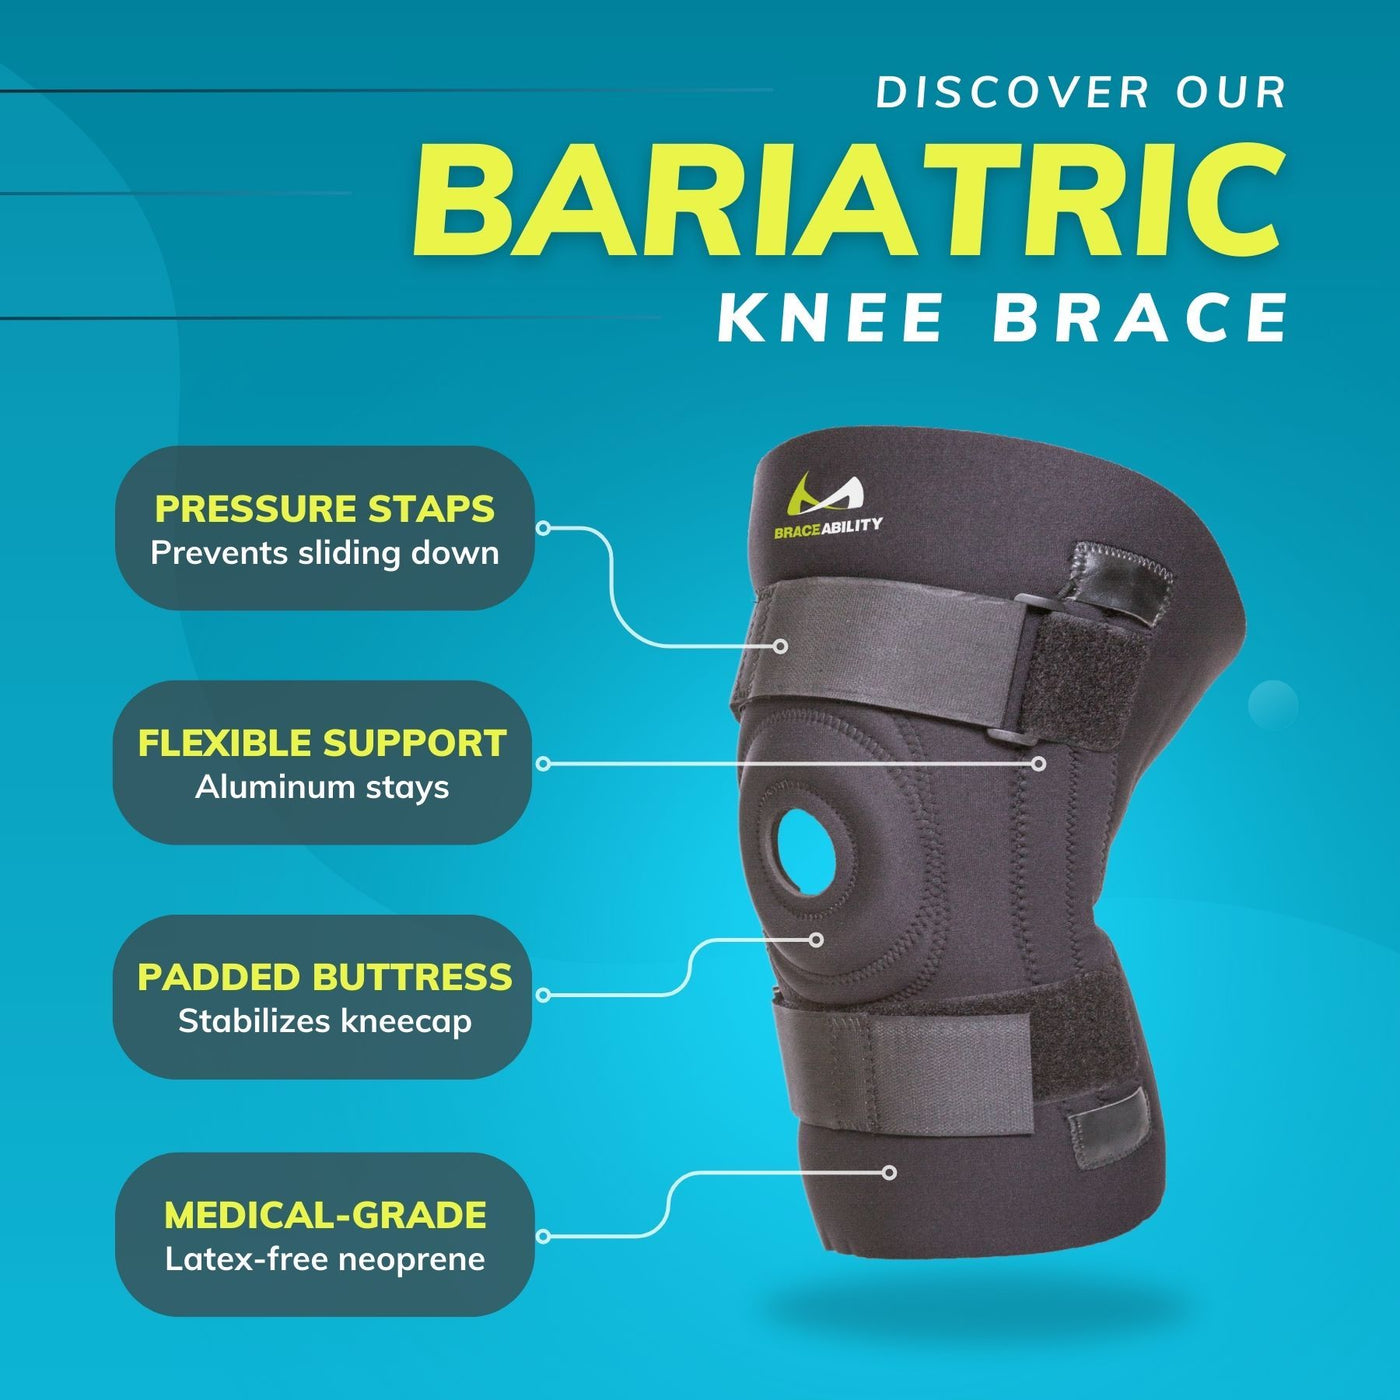 Braceability bariatric knee brace with pressure straps and medical-grade 